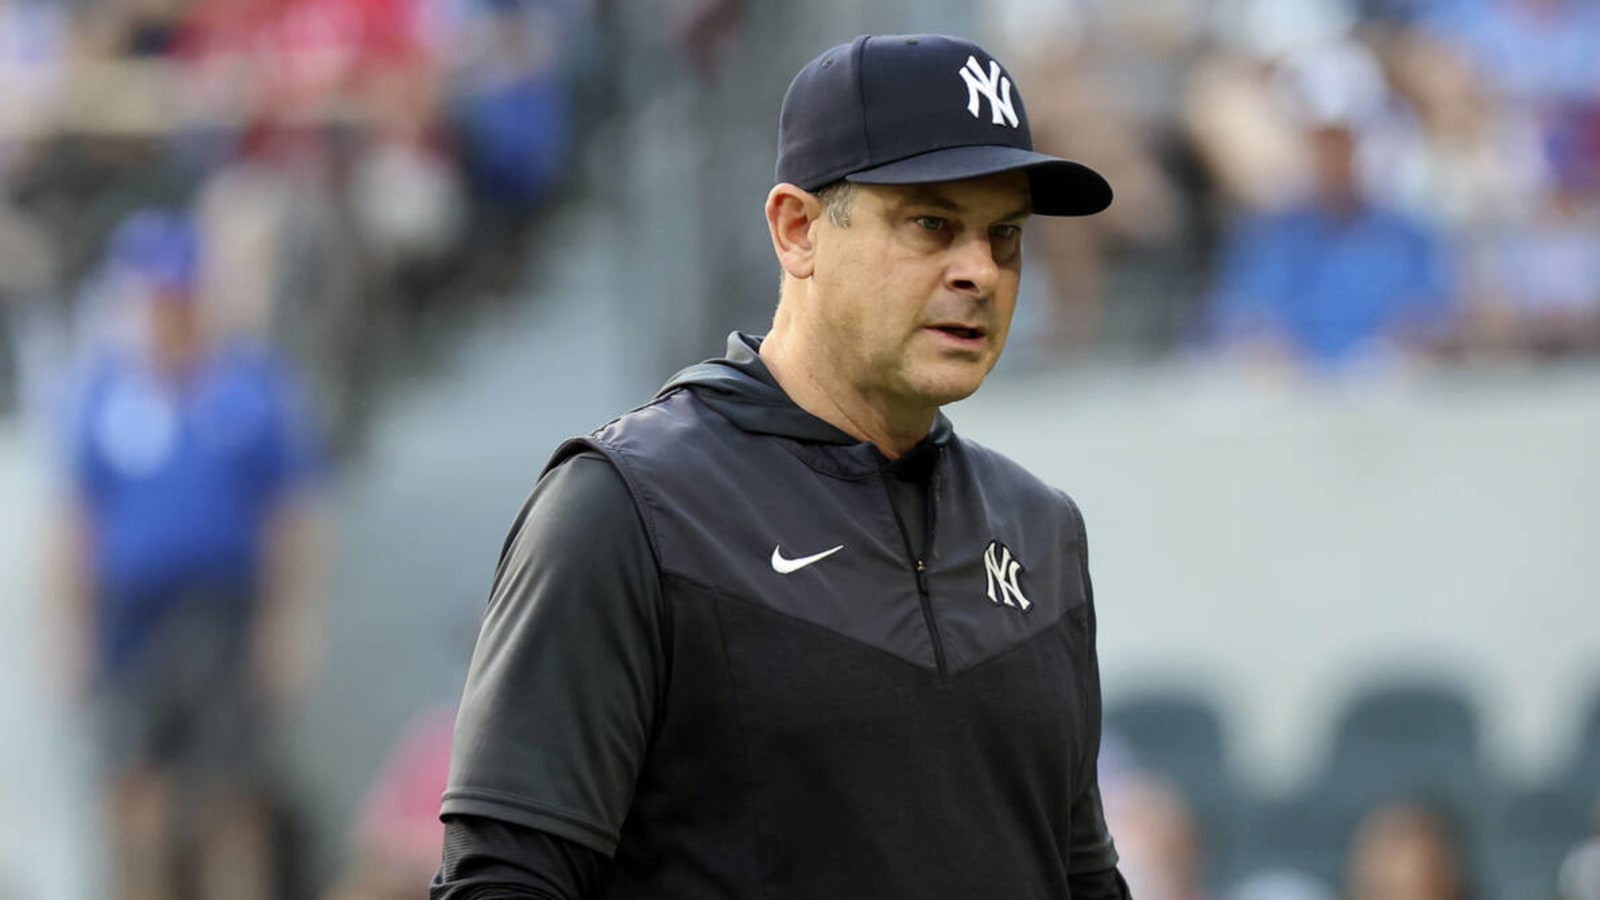 Aaron Boone didn't worry about job security after sweep